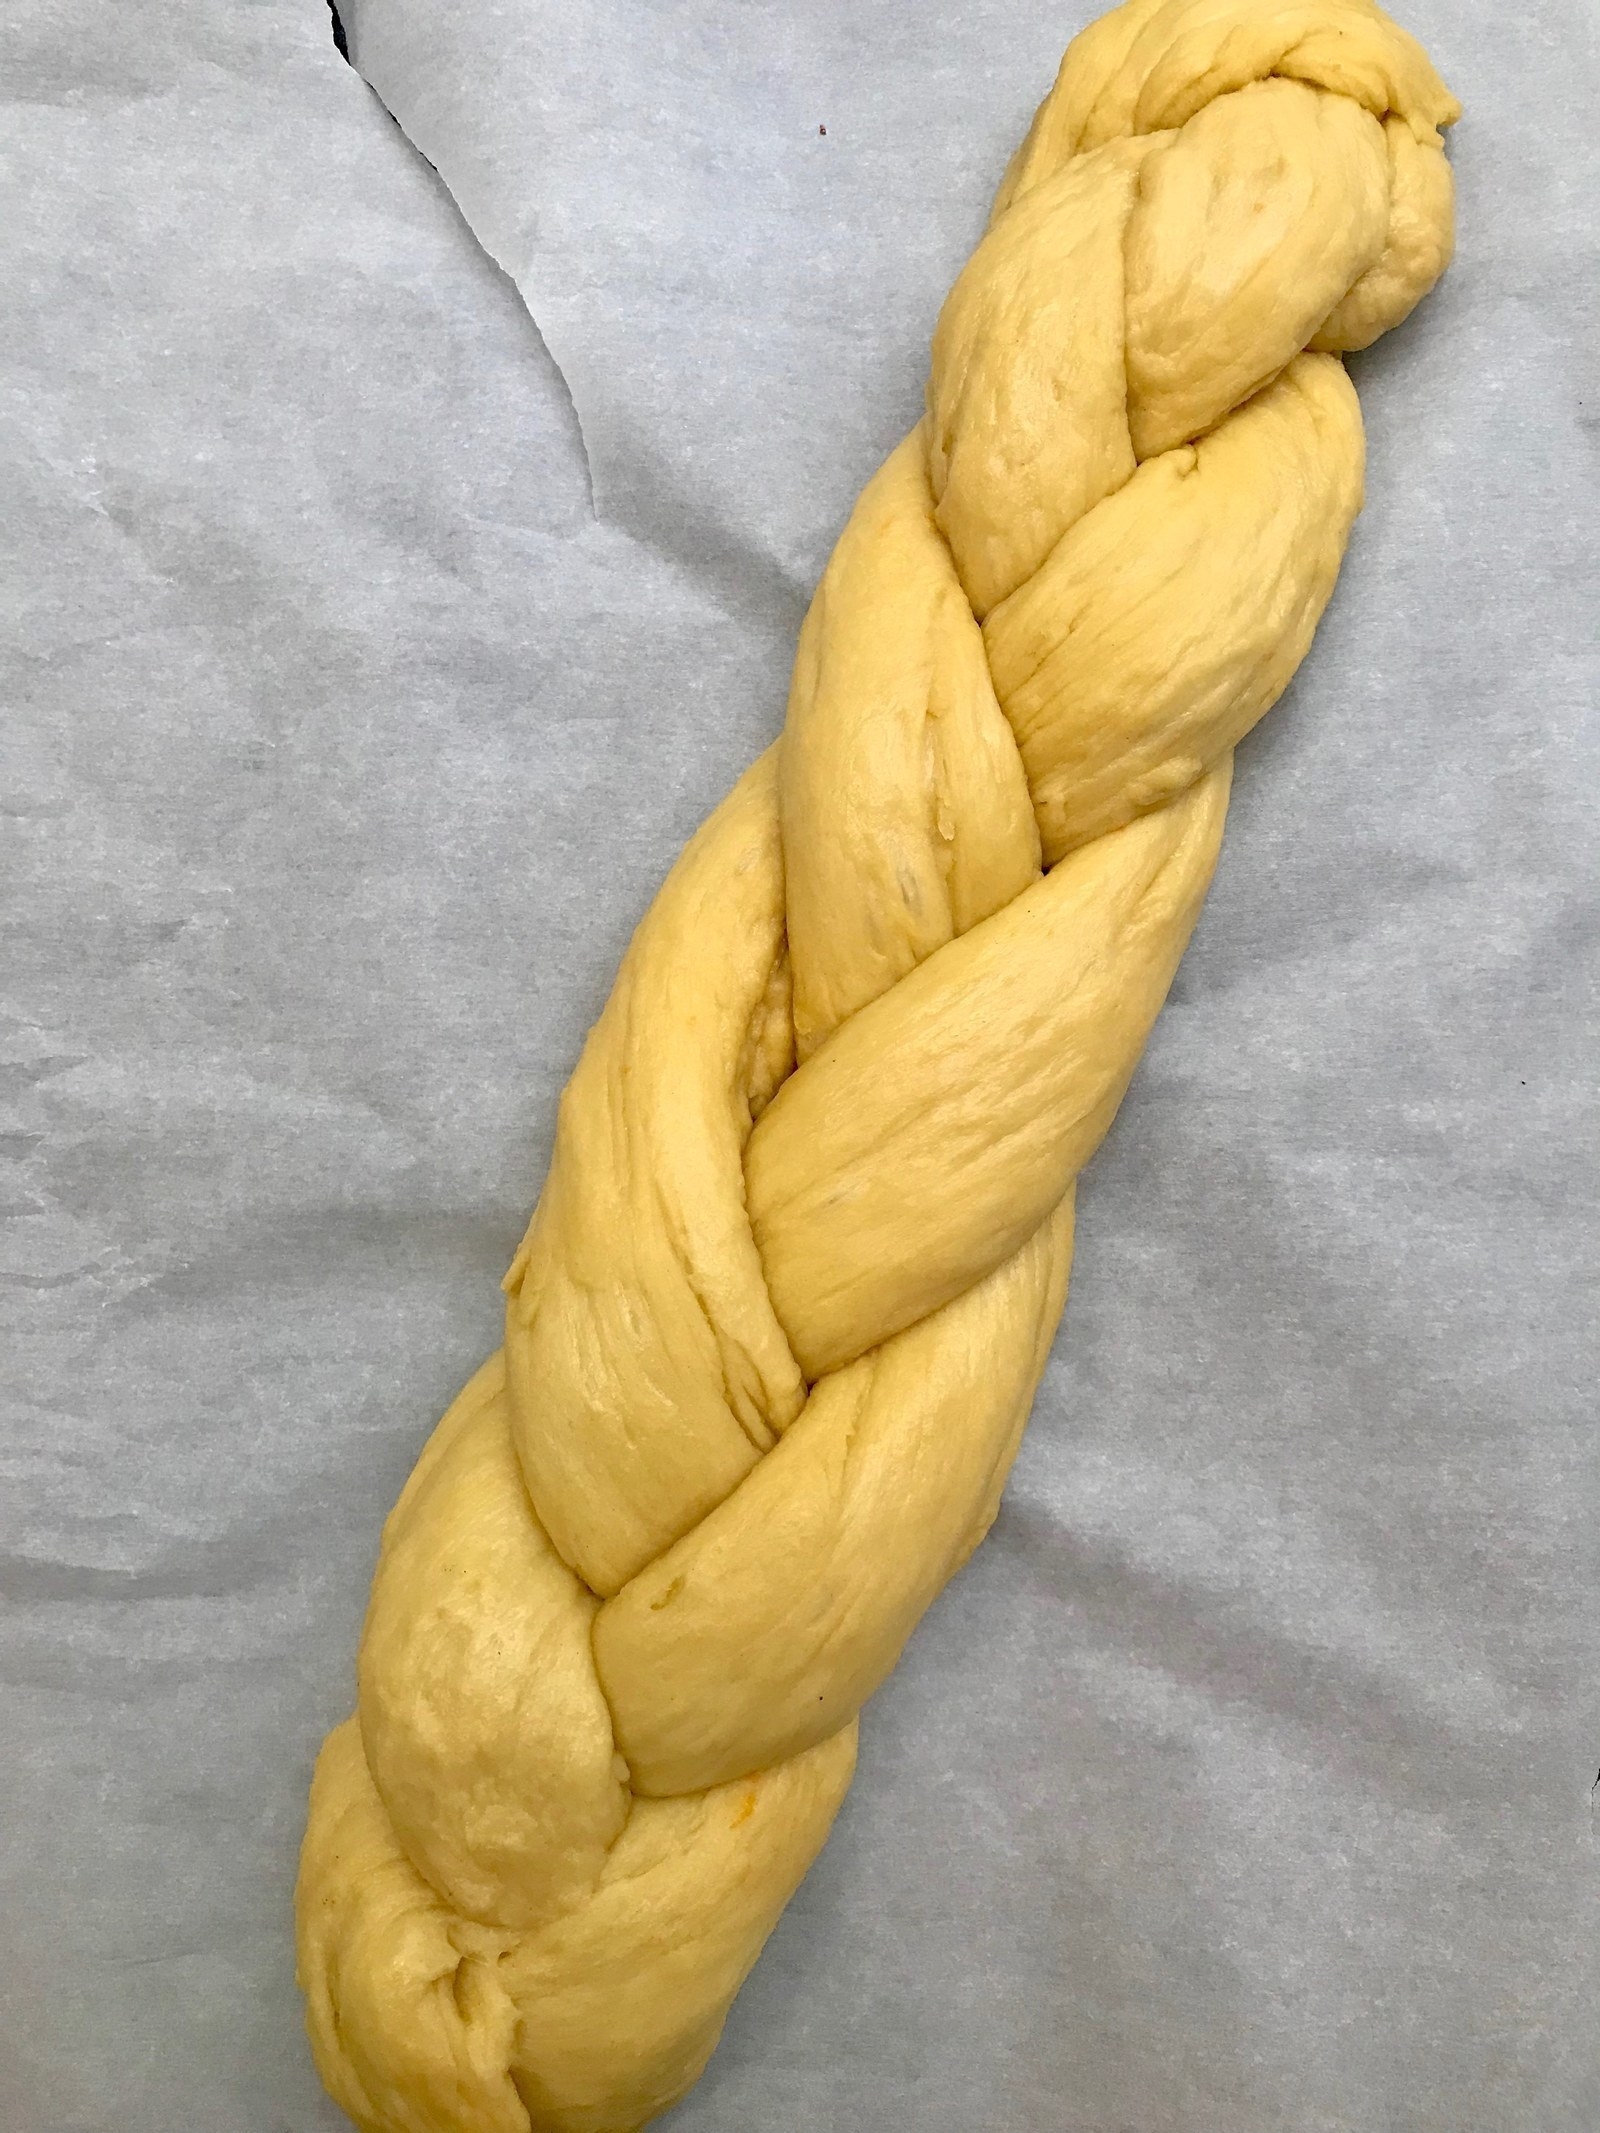 A braided loaf of challah, ready to be baked.